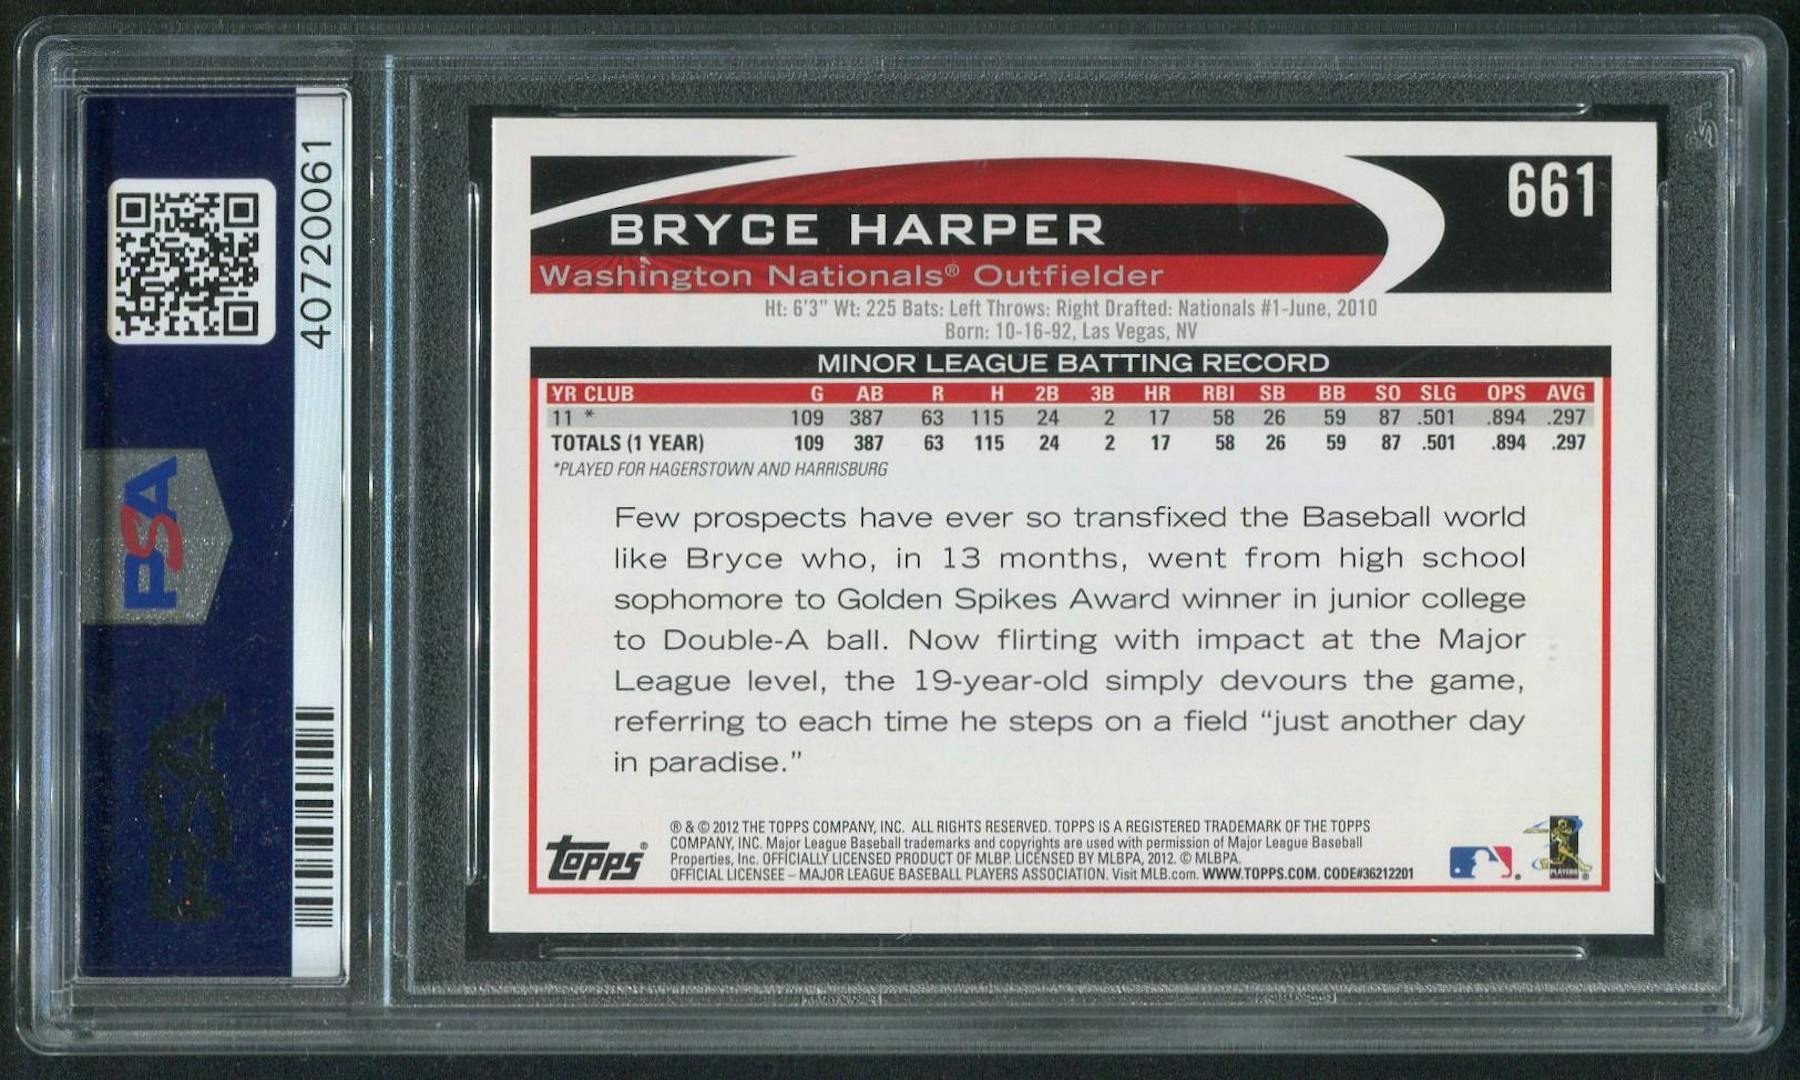 Guide to the 2012 Topps 661 Bryce Harper Cards 